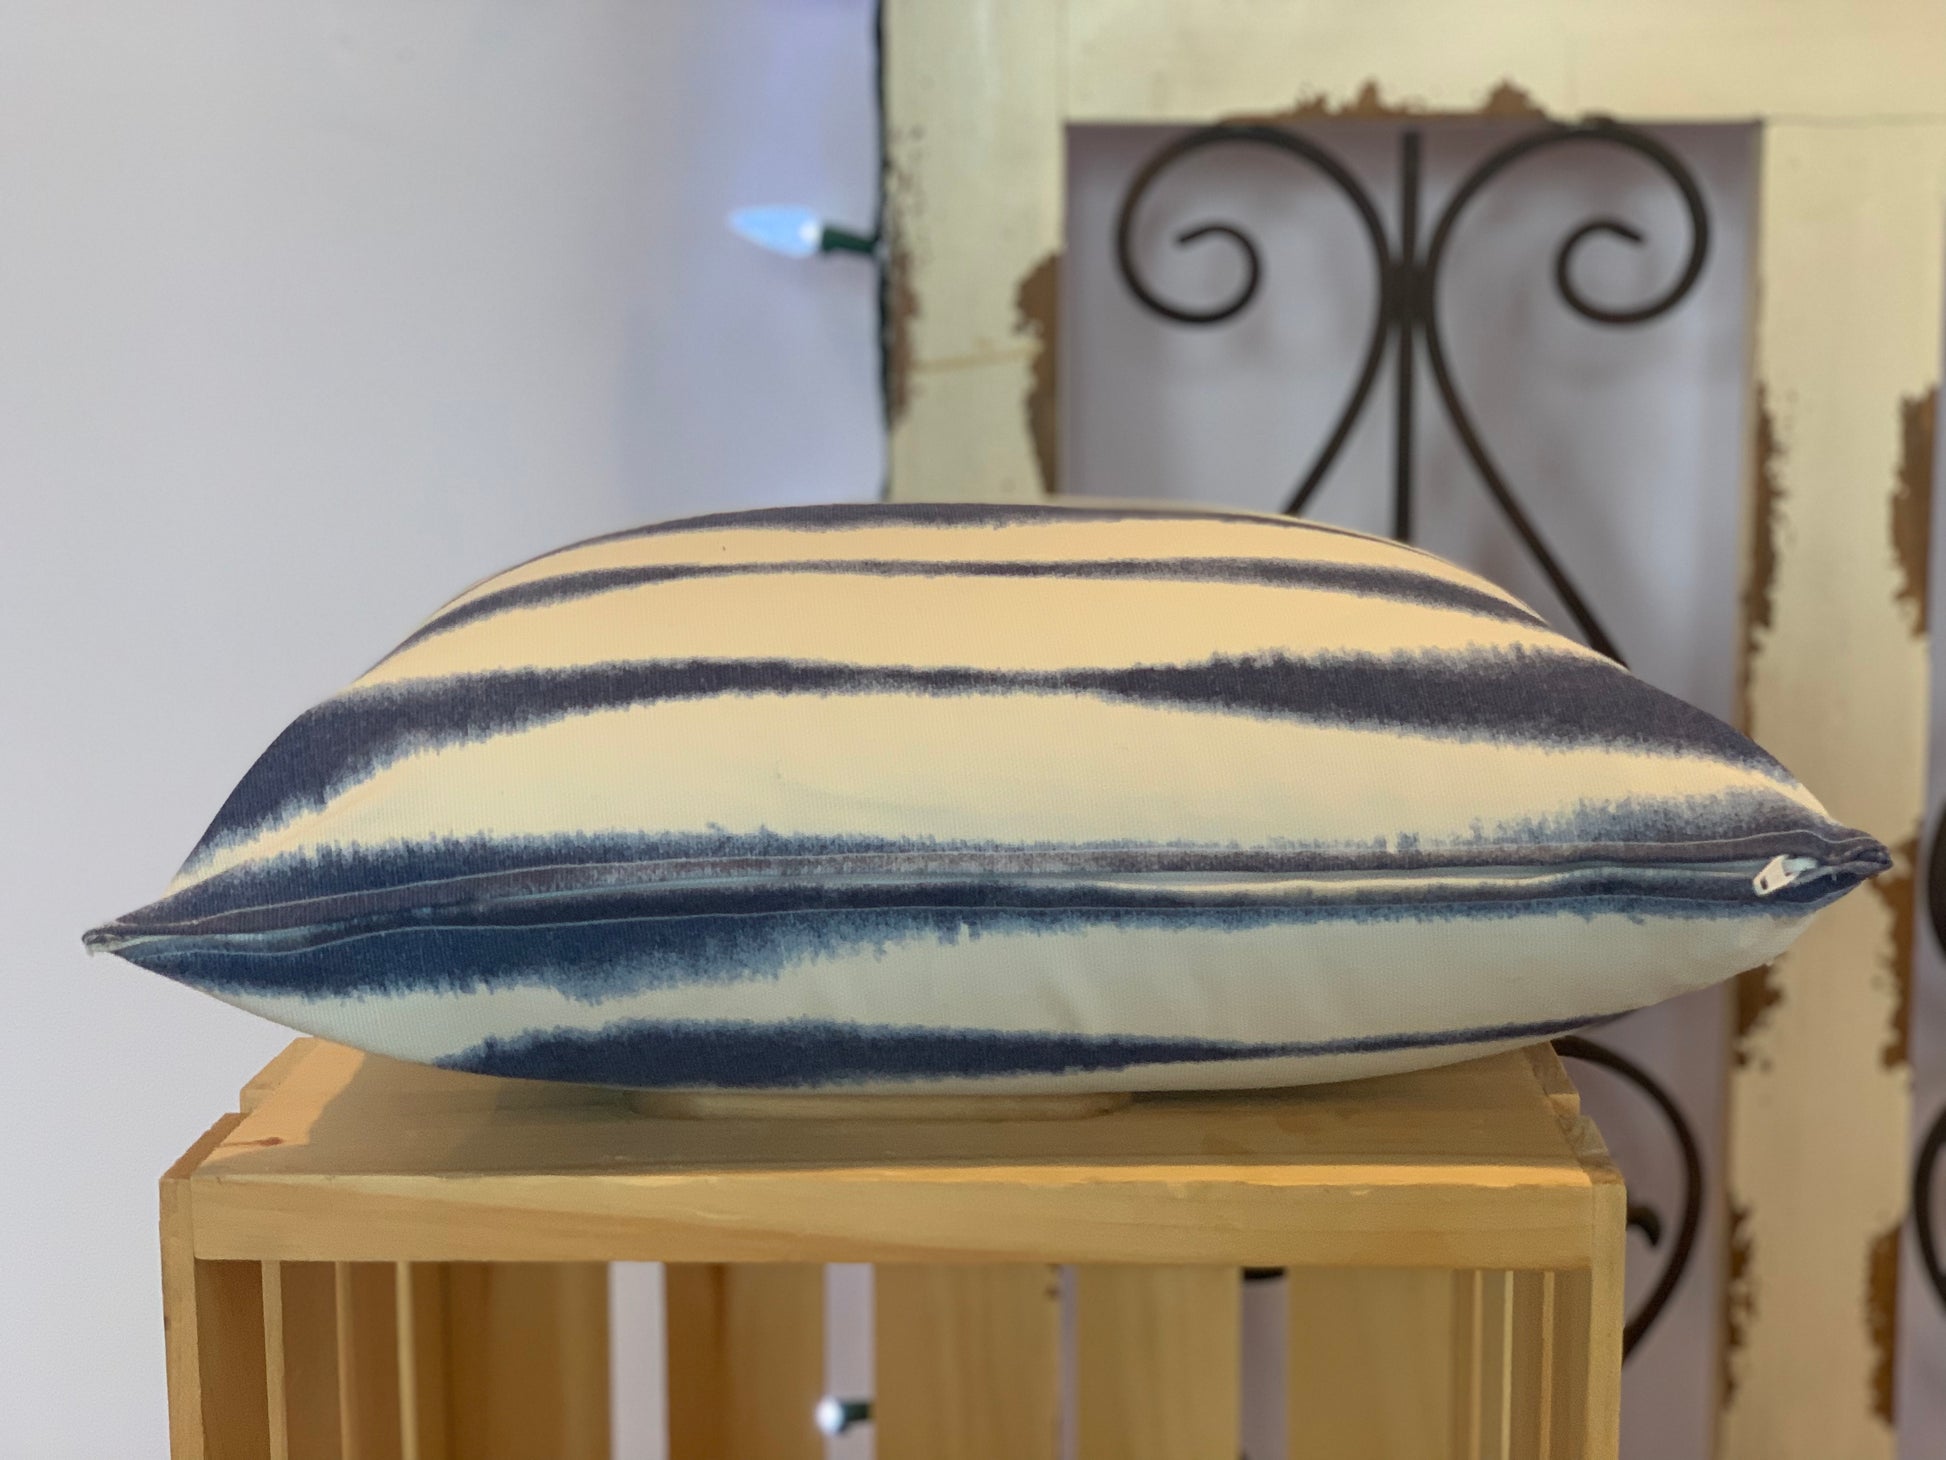 Lumbar (12" x 16") Abstract Blue Striped Pillow Covers - InRugCo Studio & Gift Shop